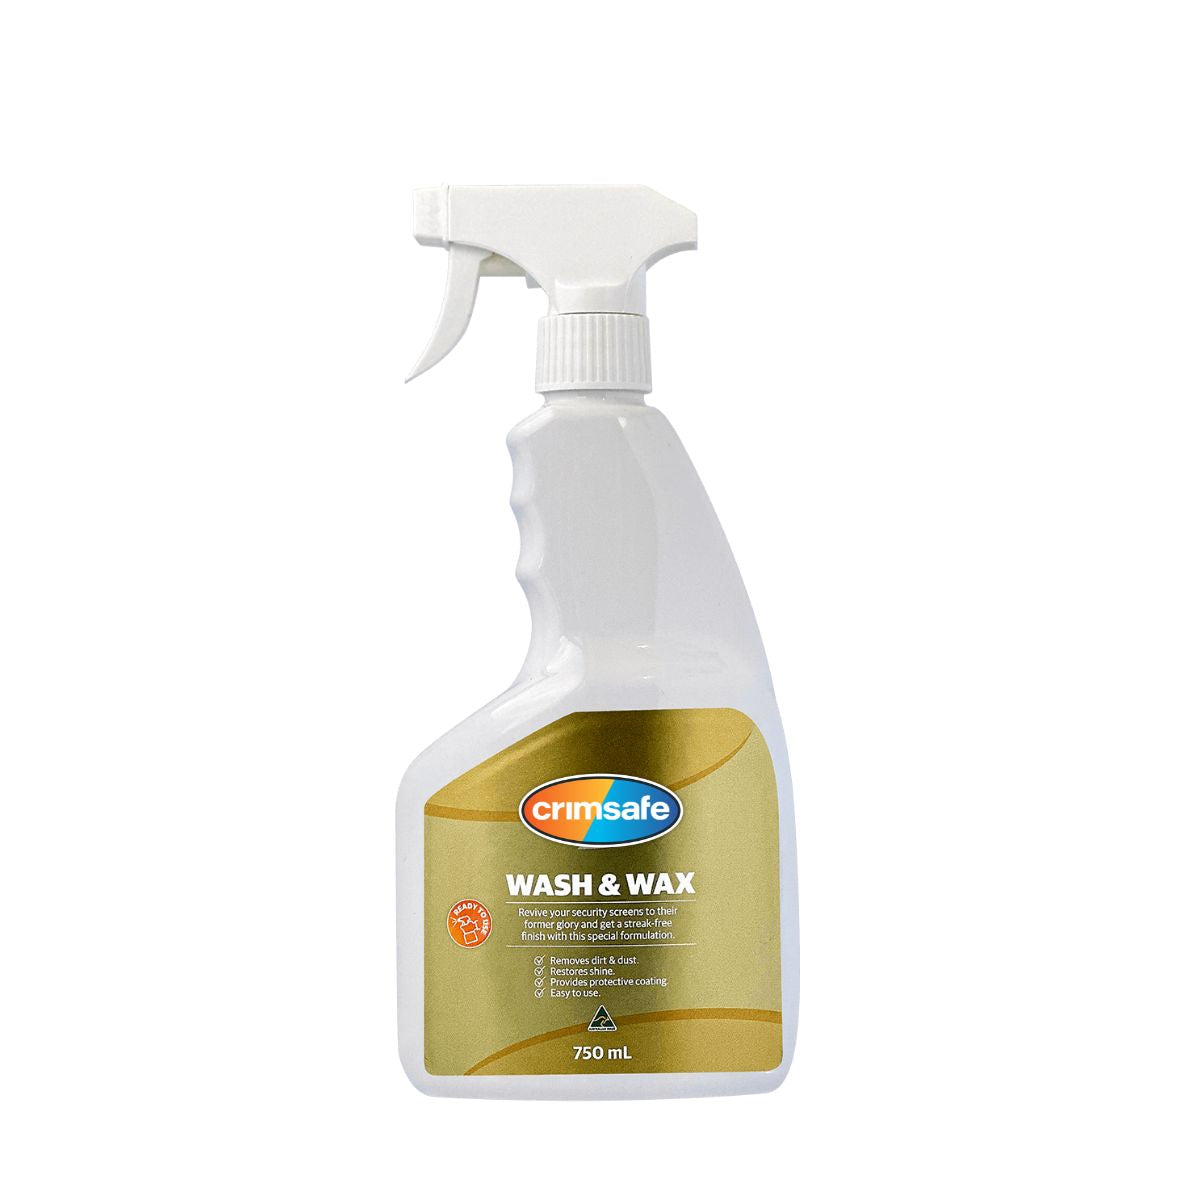 Crimsafe Ready-to-use Cleaning Kit - 750ml